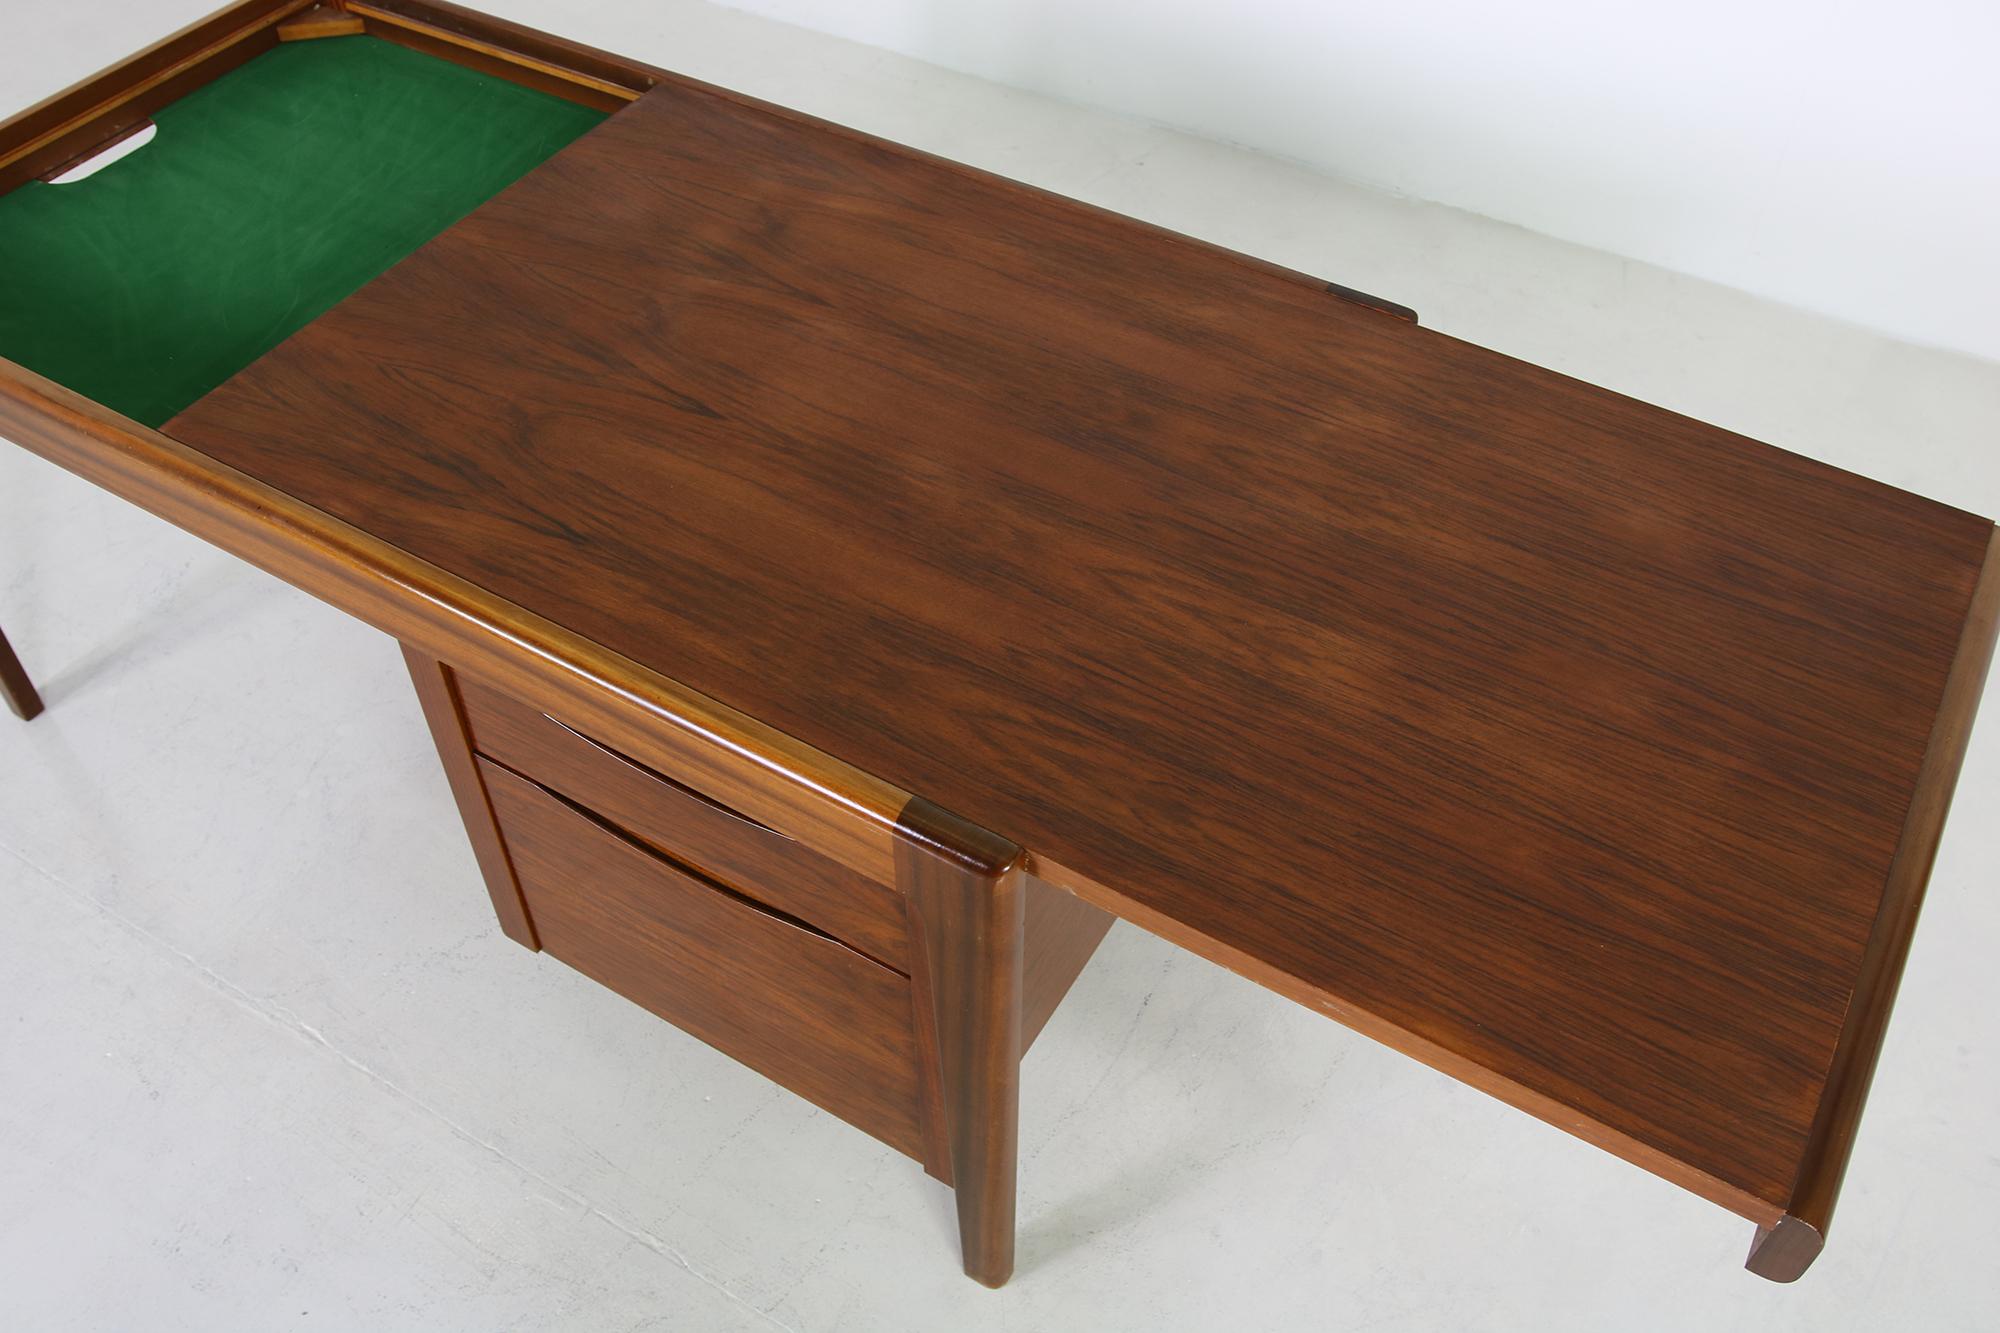 Rare 1970s Extendable Teak and Walnut Writing Table, Drawers, Freestanding Desk 3